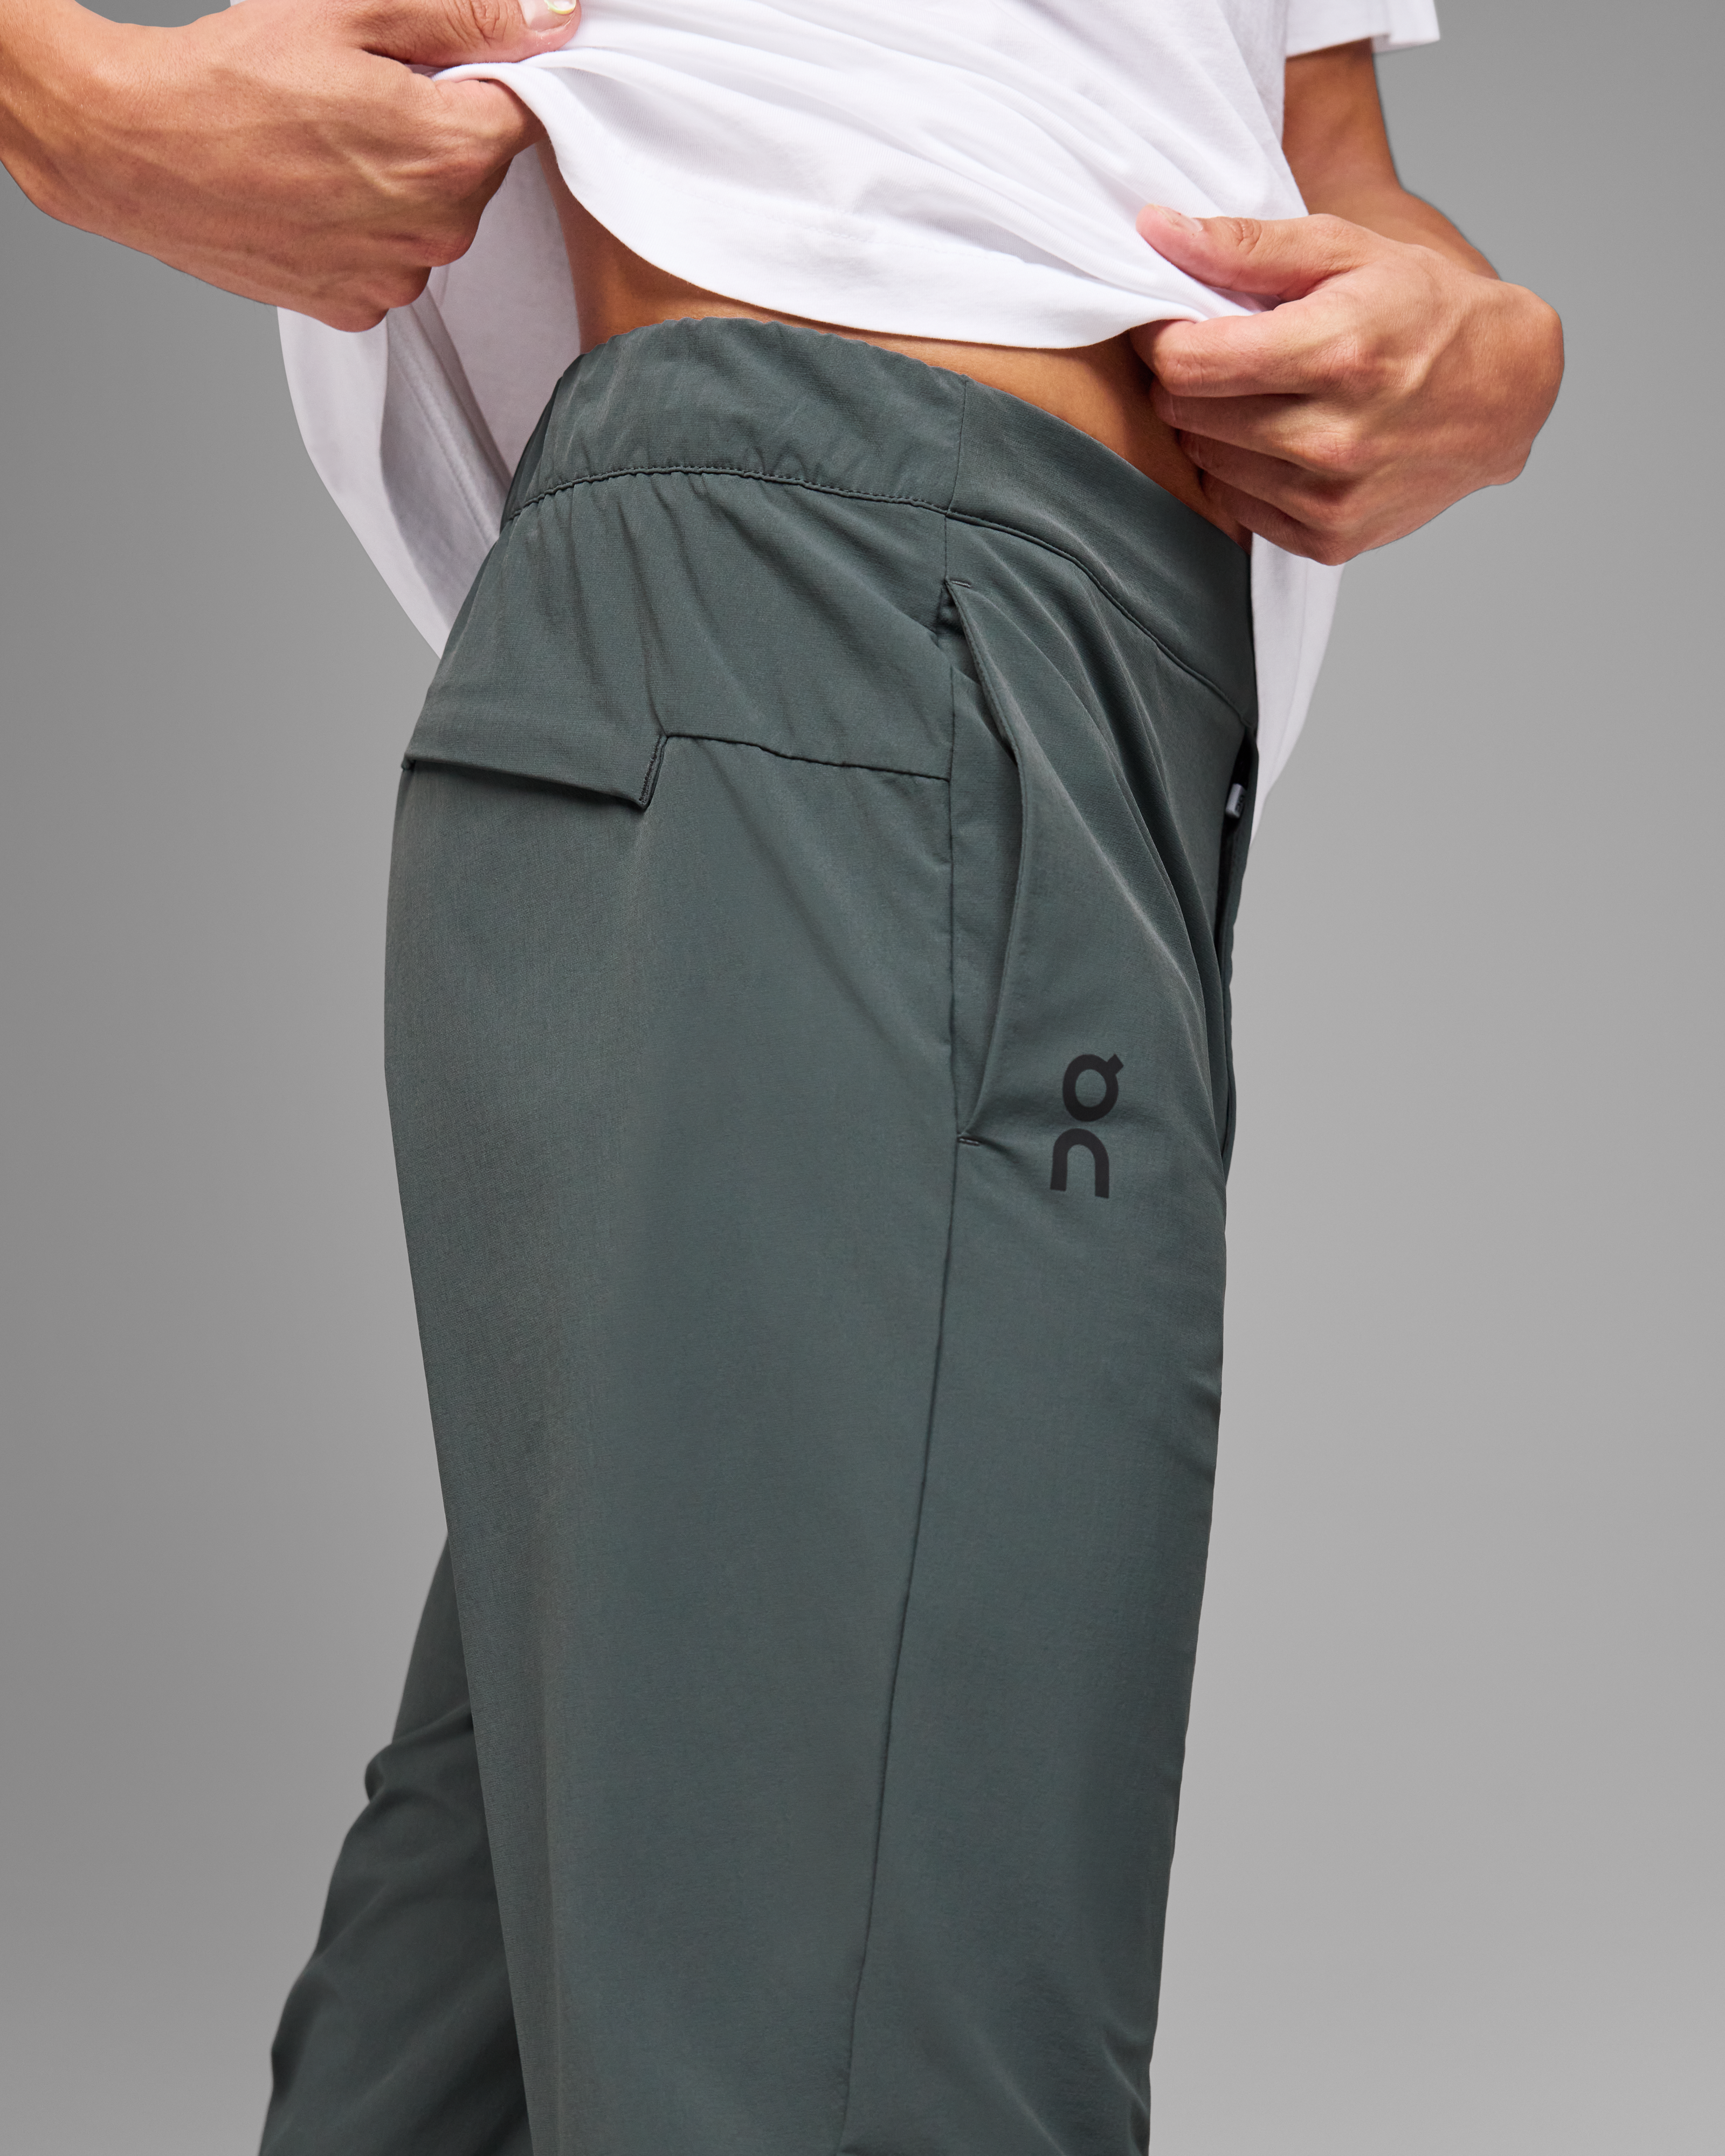 WANGPU Athletic Pants for Men Casual Solid Trousers Active Running